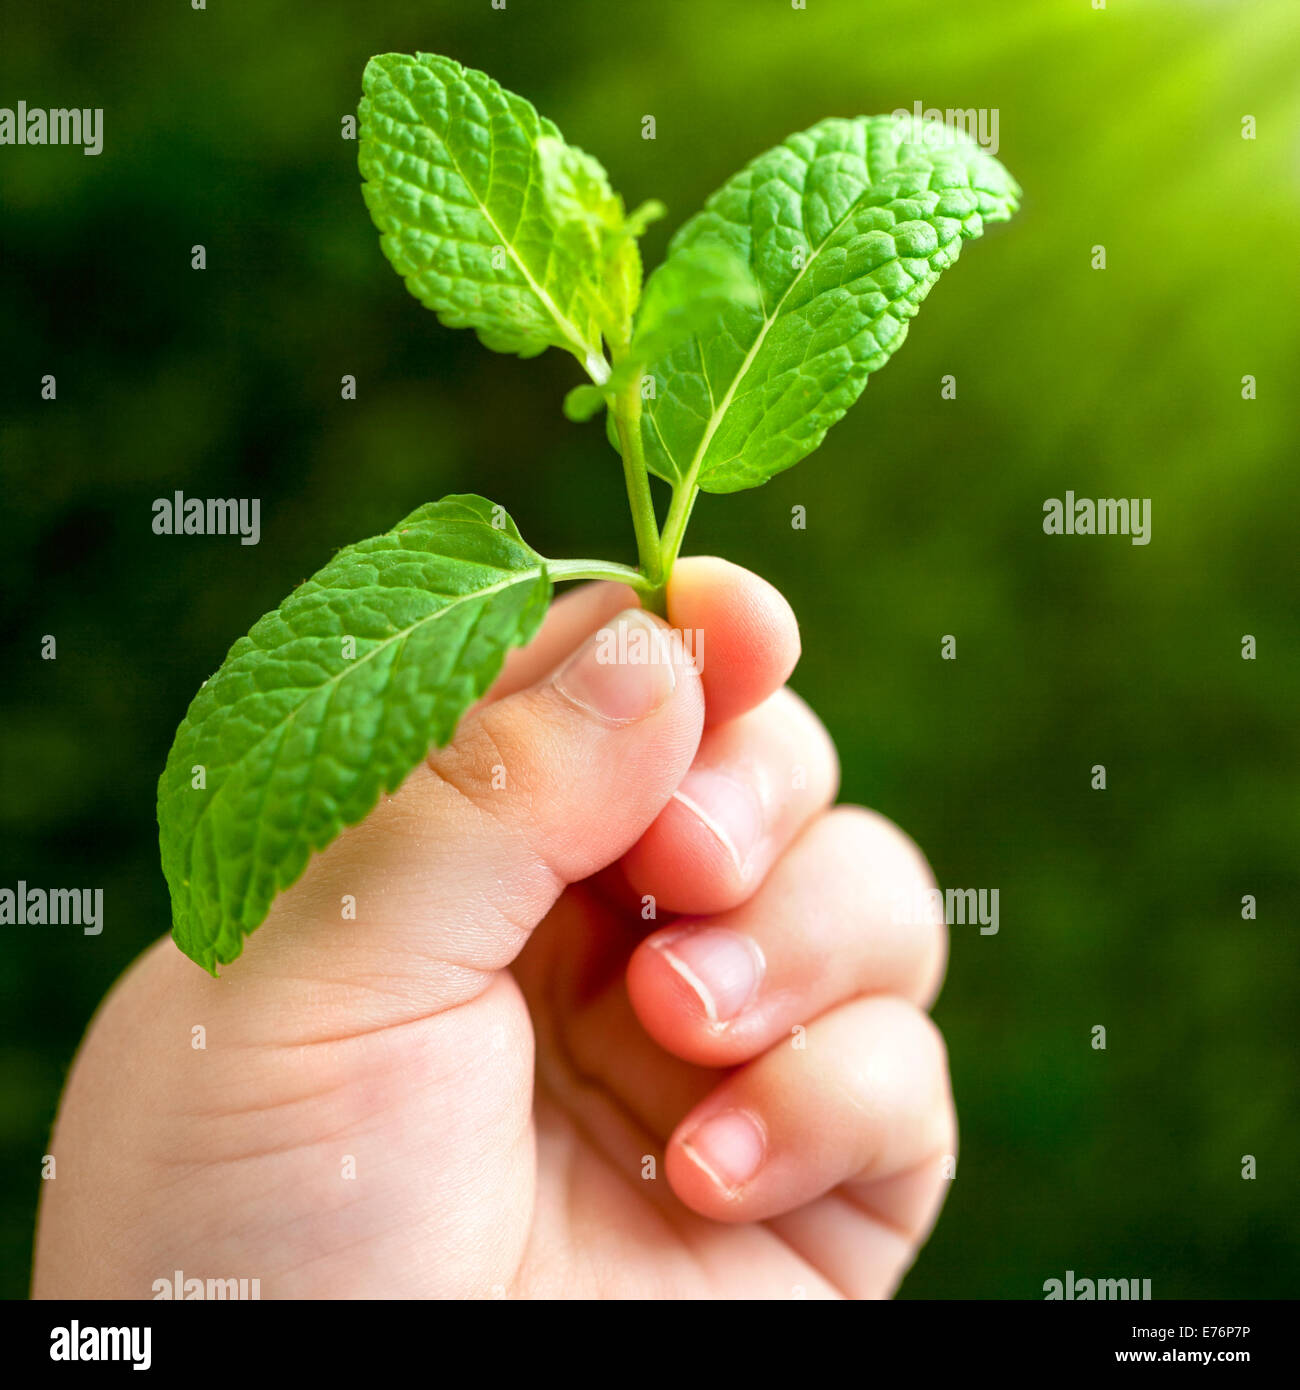 Macro close up of baby hand holding small green leaf. Stock Photo